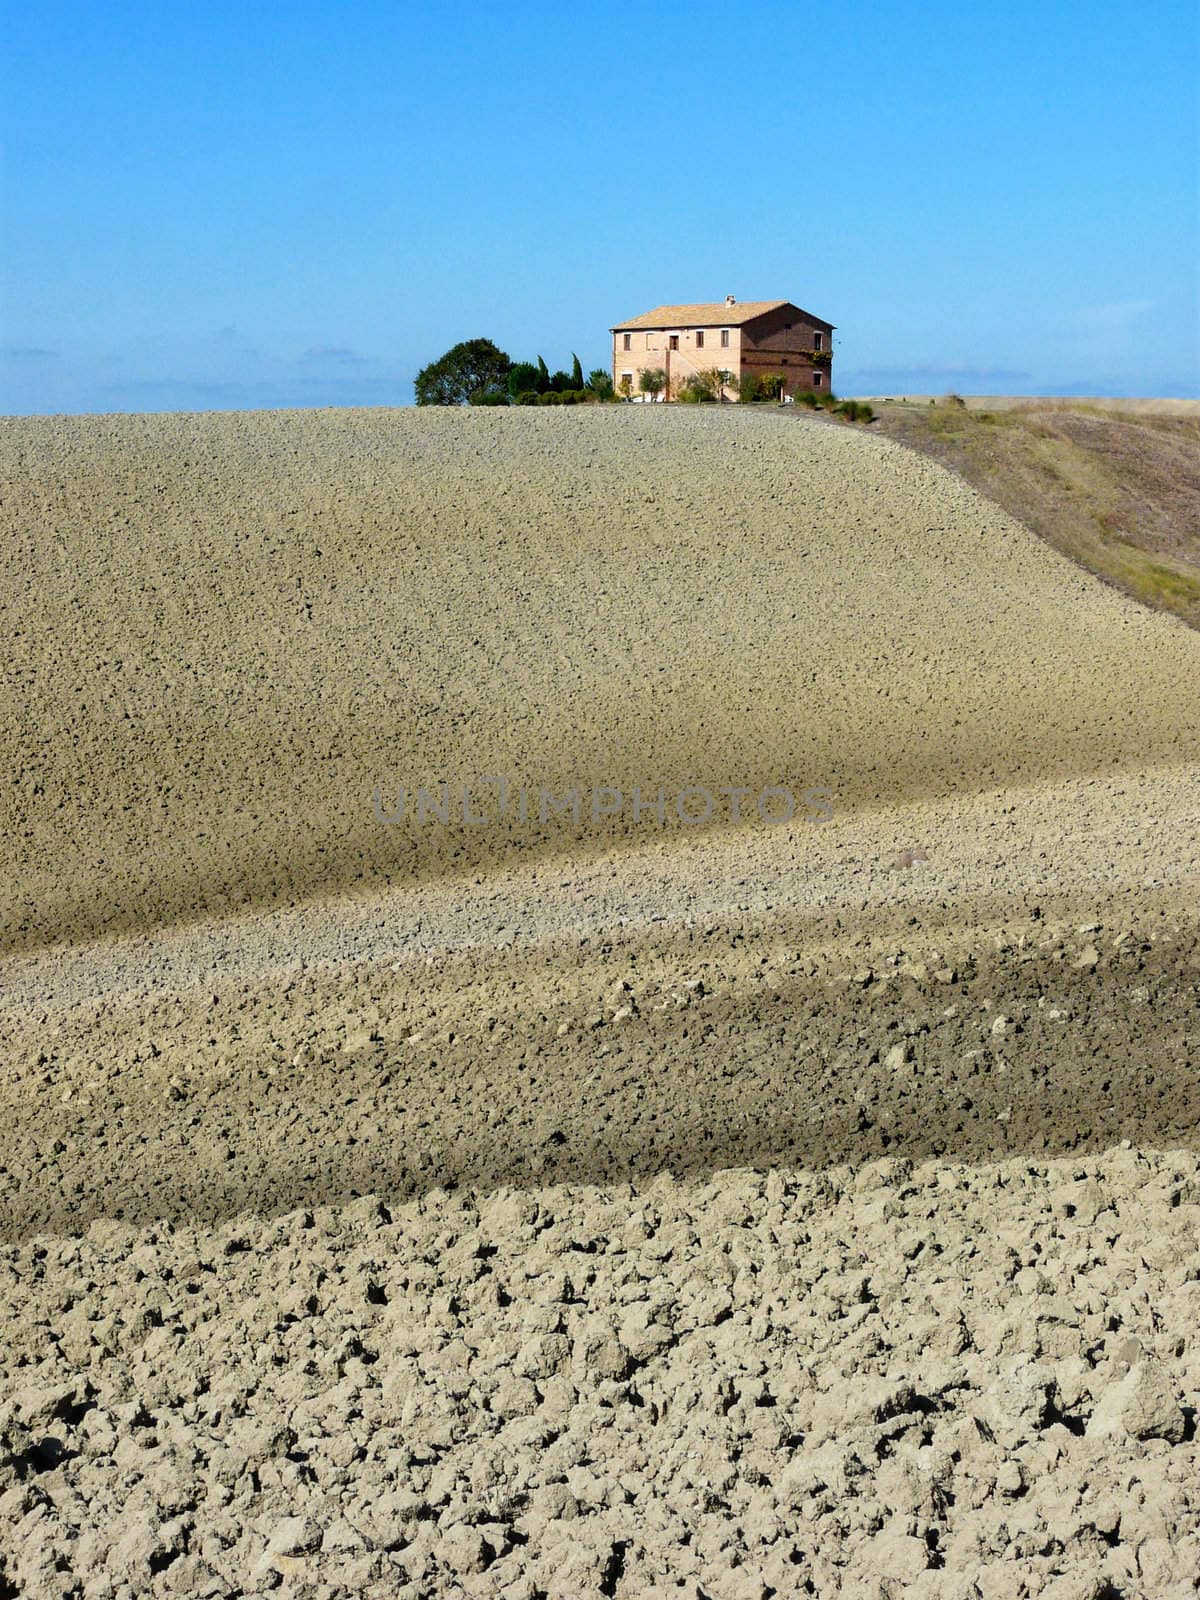 Typical Tuscan house with plowed fields in autumn near Pienza in the Val d�Orcia in Tuscany, Italy.